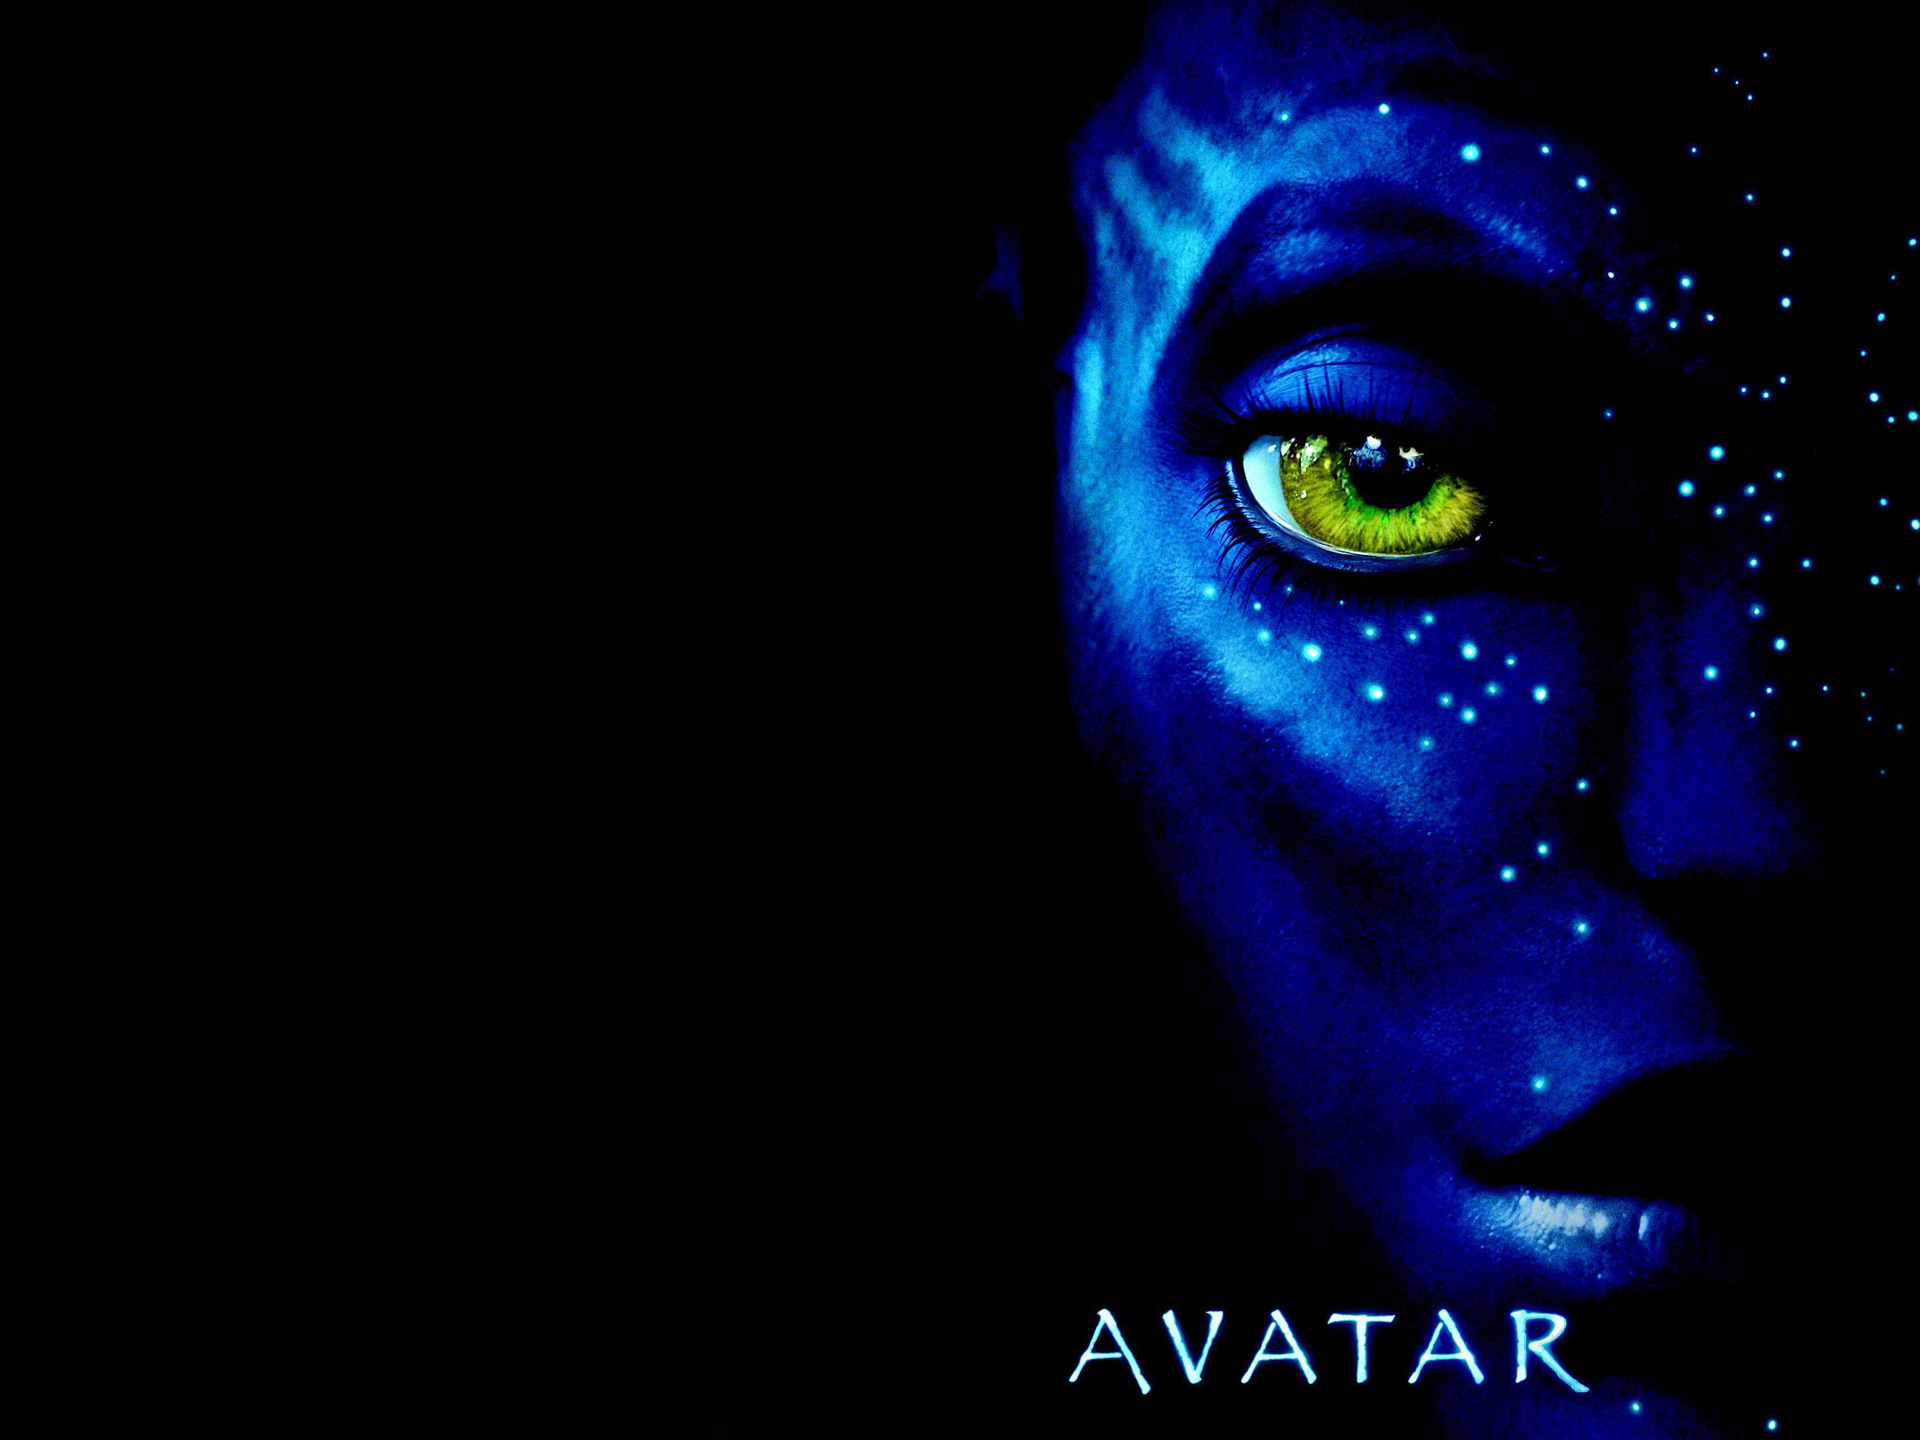 Official Avatar Movie Poster Wallpapers HD Wallpapers